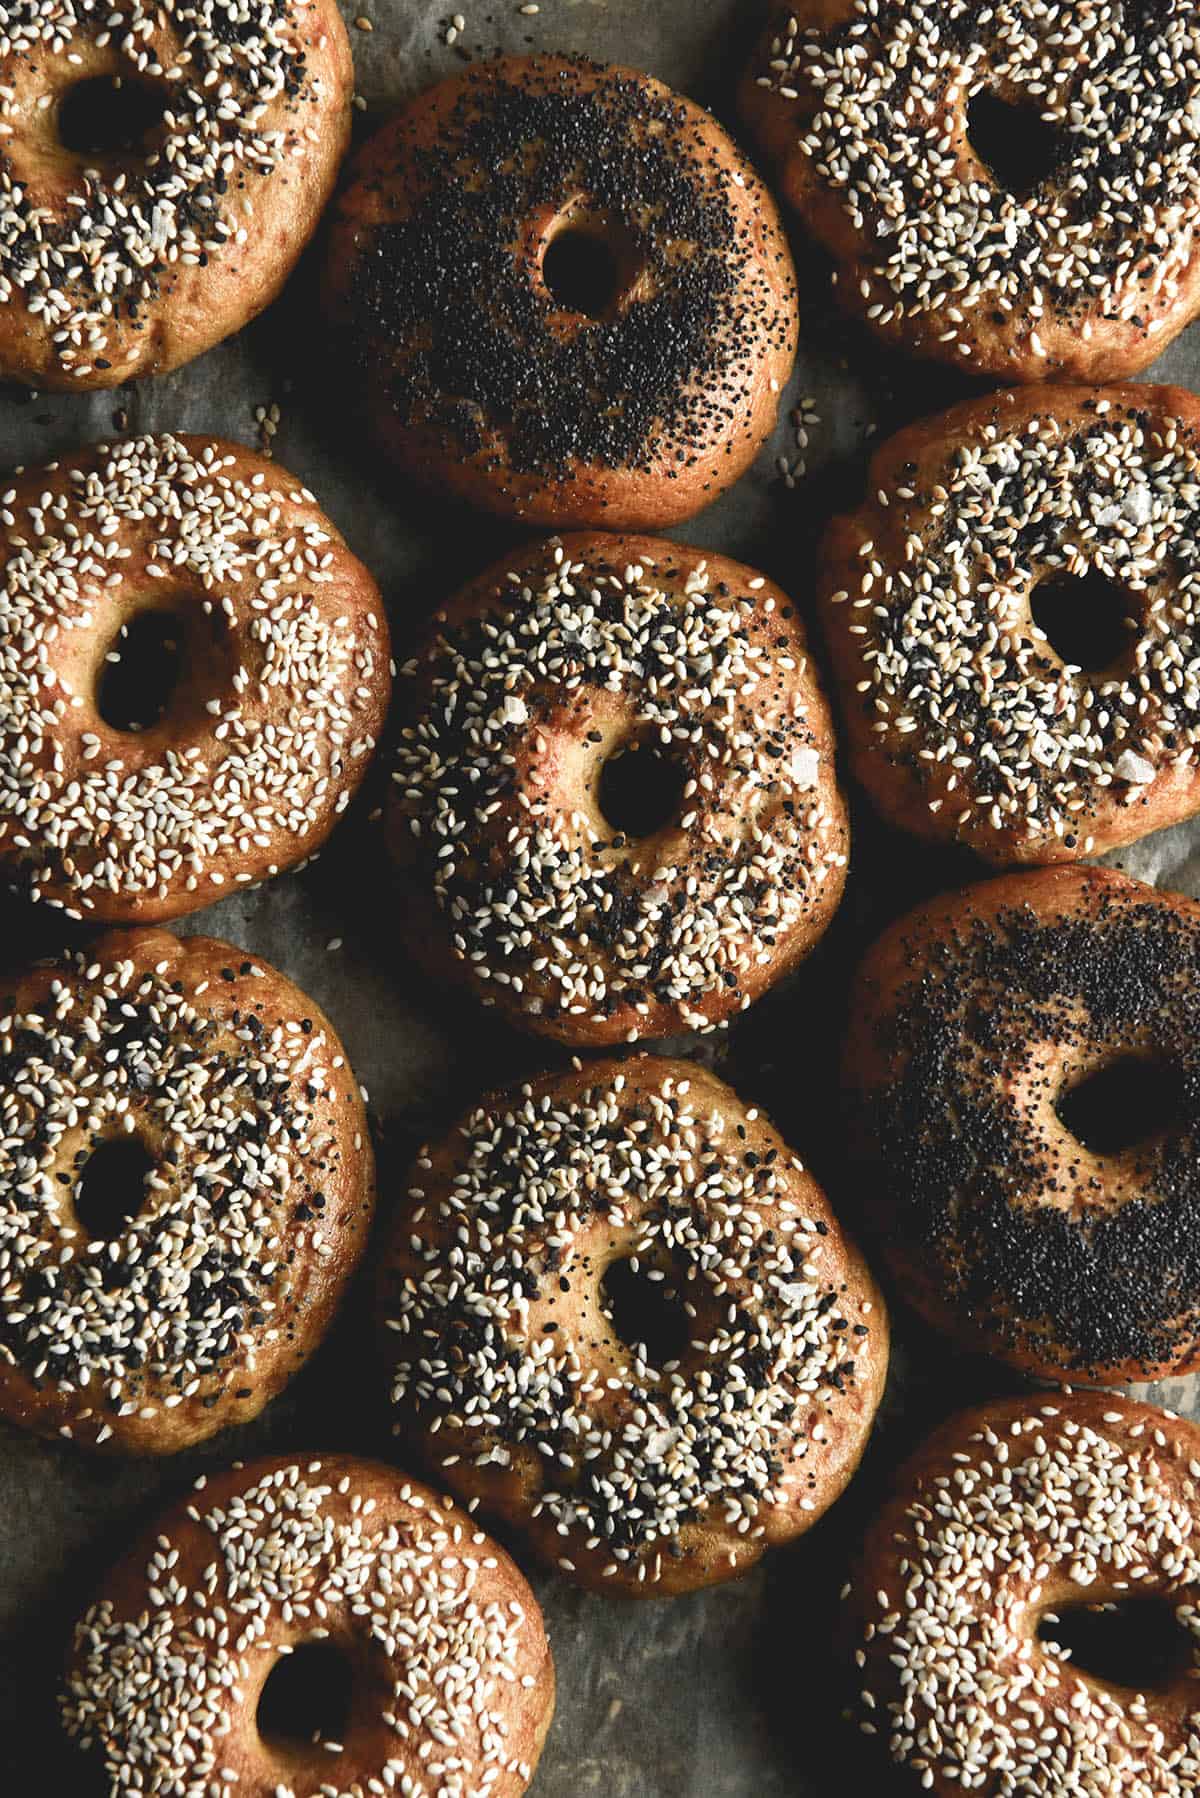 An aerial image of a tray filled with gluten free bagels topped with everything bagel seasoning, toasted sesame seeds or poppy seeds. The shot is contrasted and moody. 